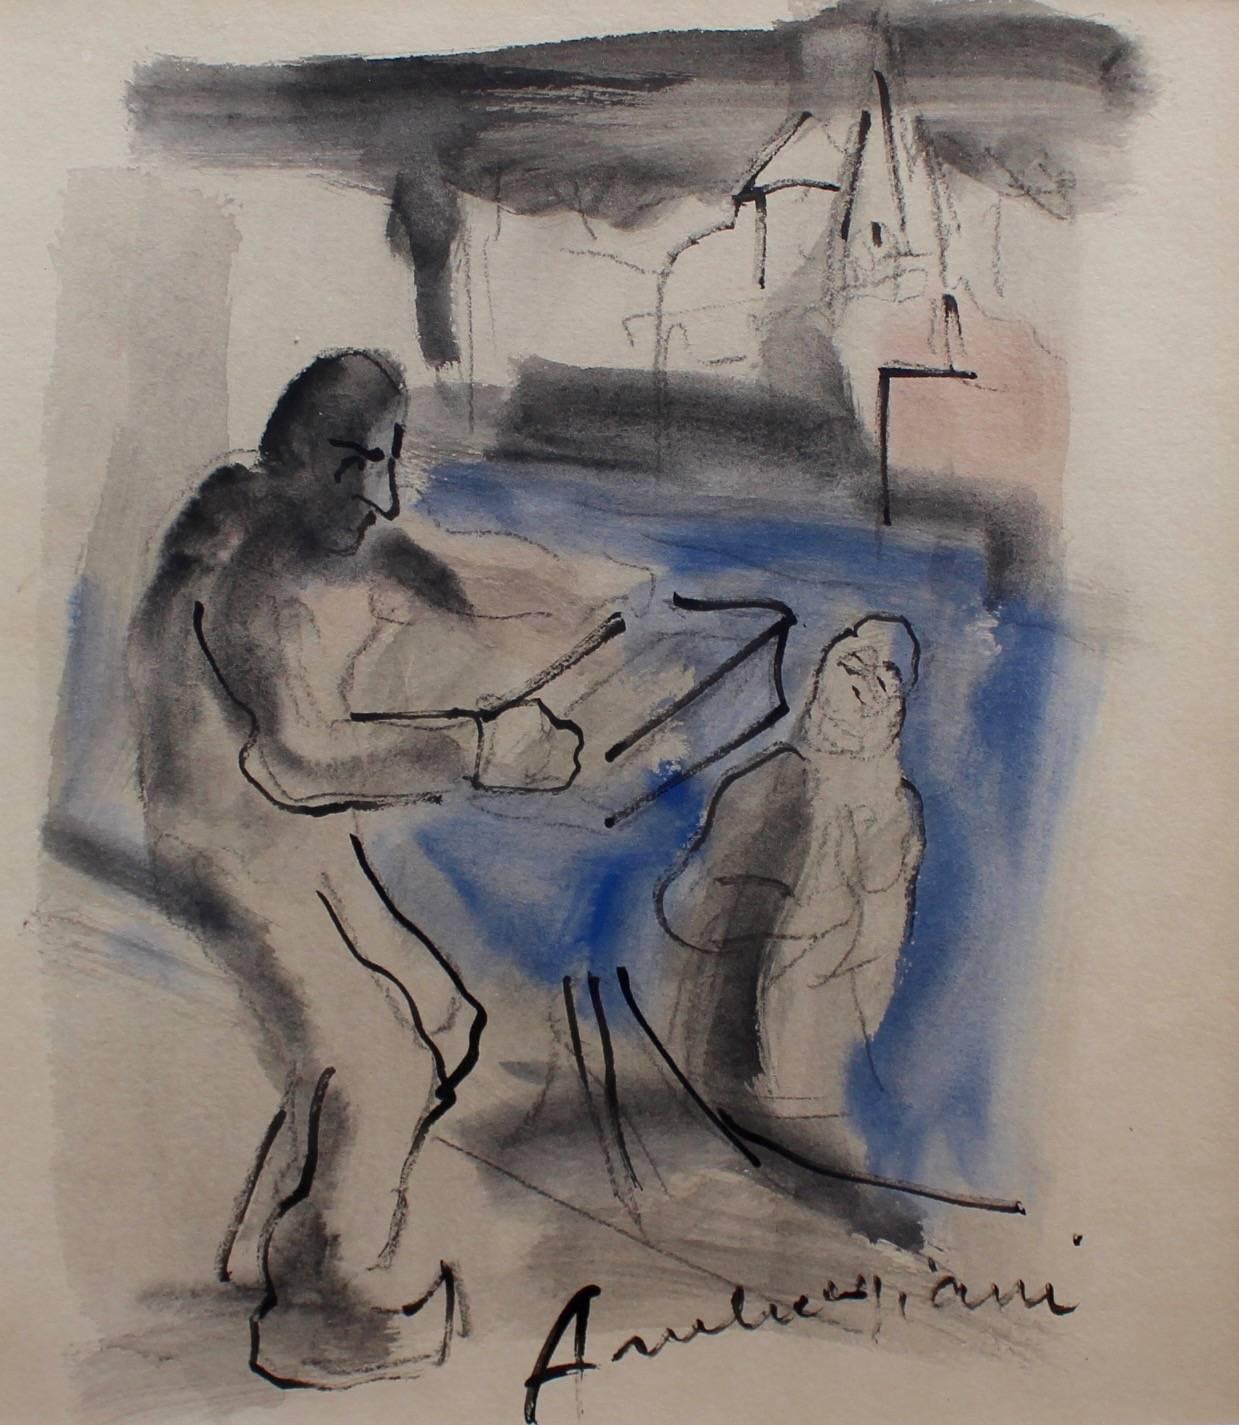 'Port of Marseille Fish Market' (c. 1960s), gouache on paper depicting the fish market in the vieux port of Marseille. A woman passing by a fisherman who is just putting out his first container for display along the quay. The image is sketch-like